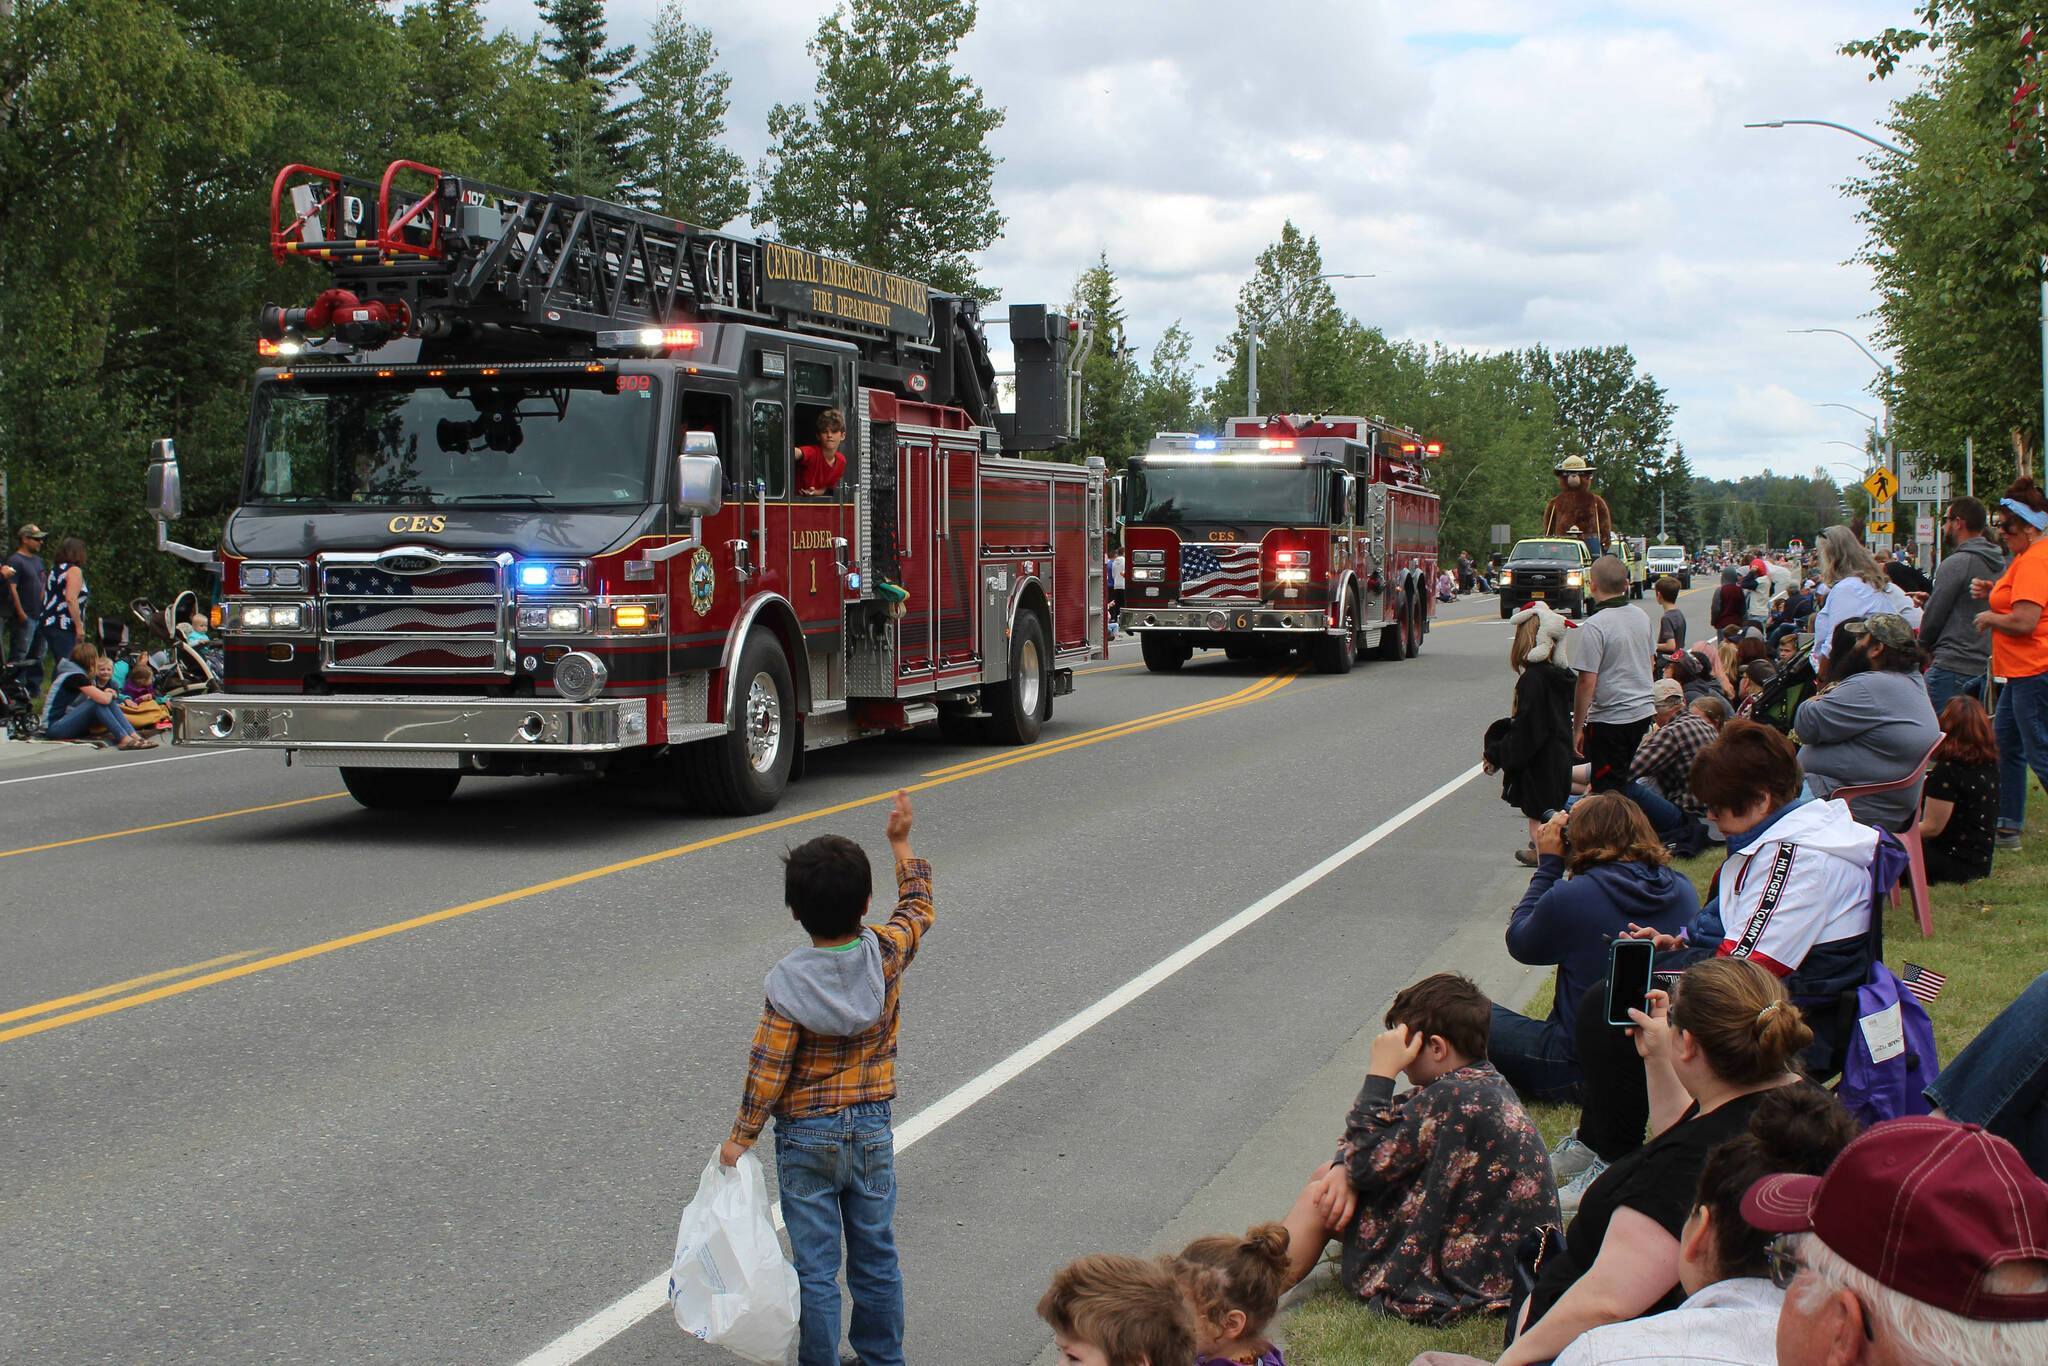 Attendees wave to Central Emergency Services fire trucks during the 65th annual Soldotna Progress Days Parade on Saturday, July 23, 2022, in Soldotna, Alaska. (Ashlyn O’Hara/Peninsula Clarion)